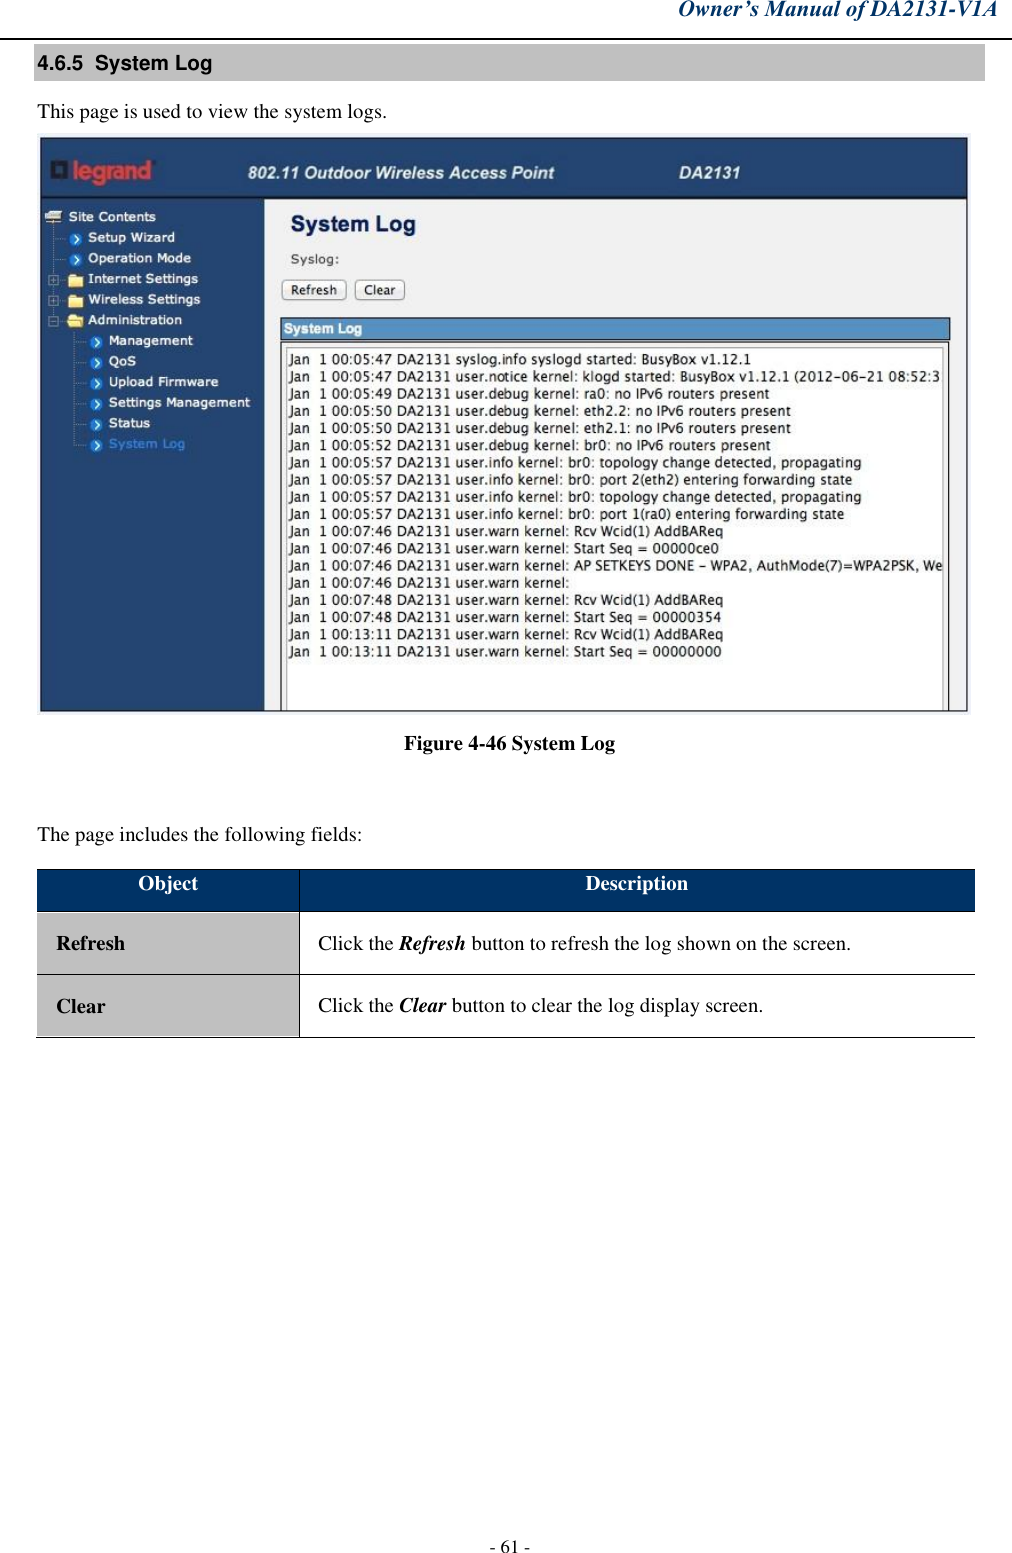 Owner’s Manual of DA2131-V1A - 61 - 4.6.5  System Log  This page is used to view the system logs. Figure 4-46 System Log The page includes the following fields: Object Description Refresh Click the Refresh button to refresh the log shown on the screen. Clear Click the Clear button to clear the log display screen. 